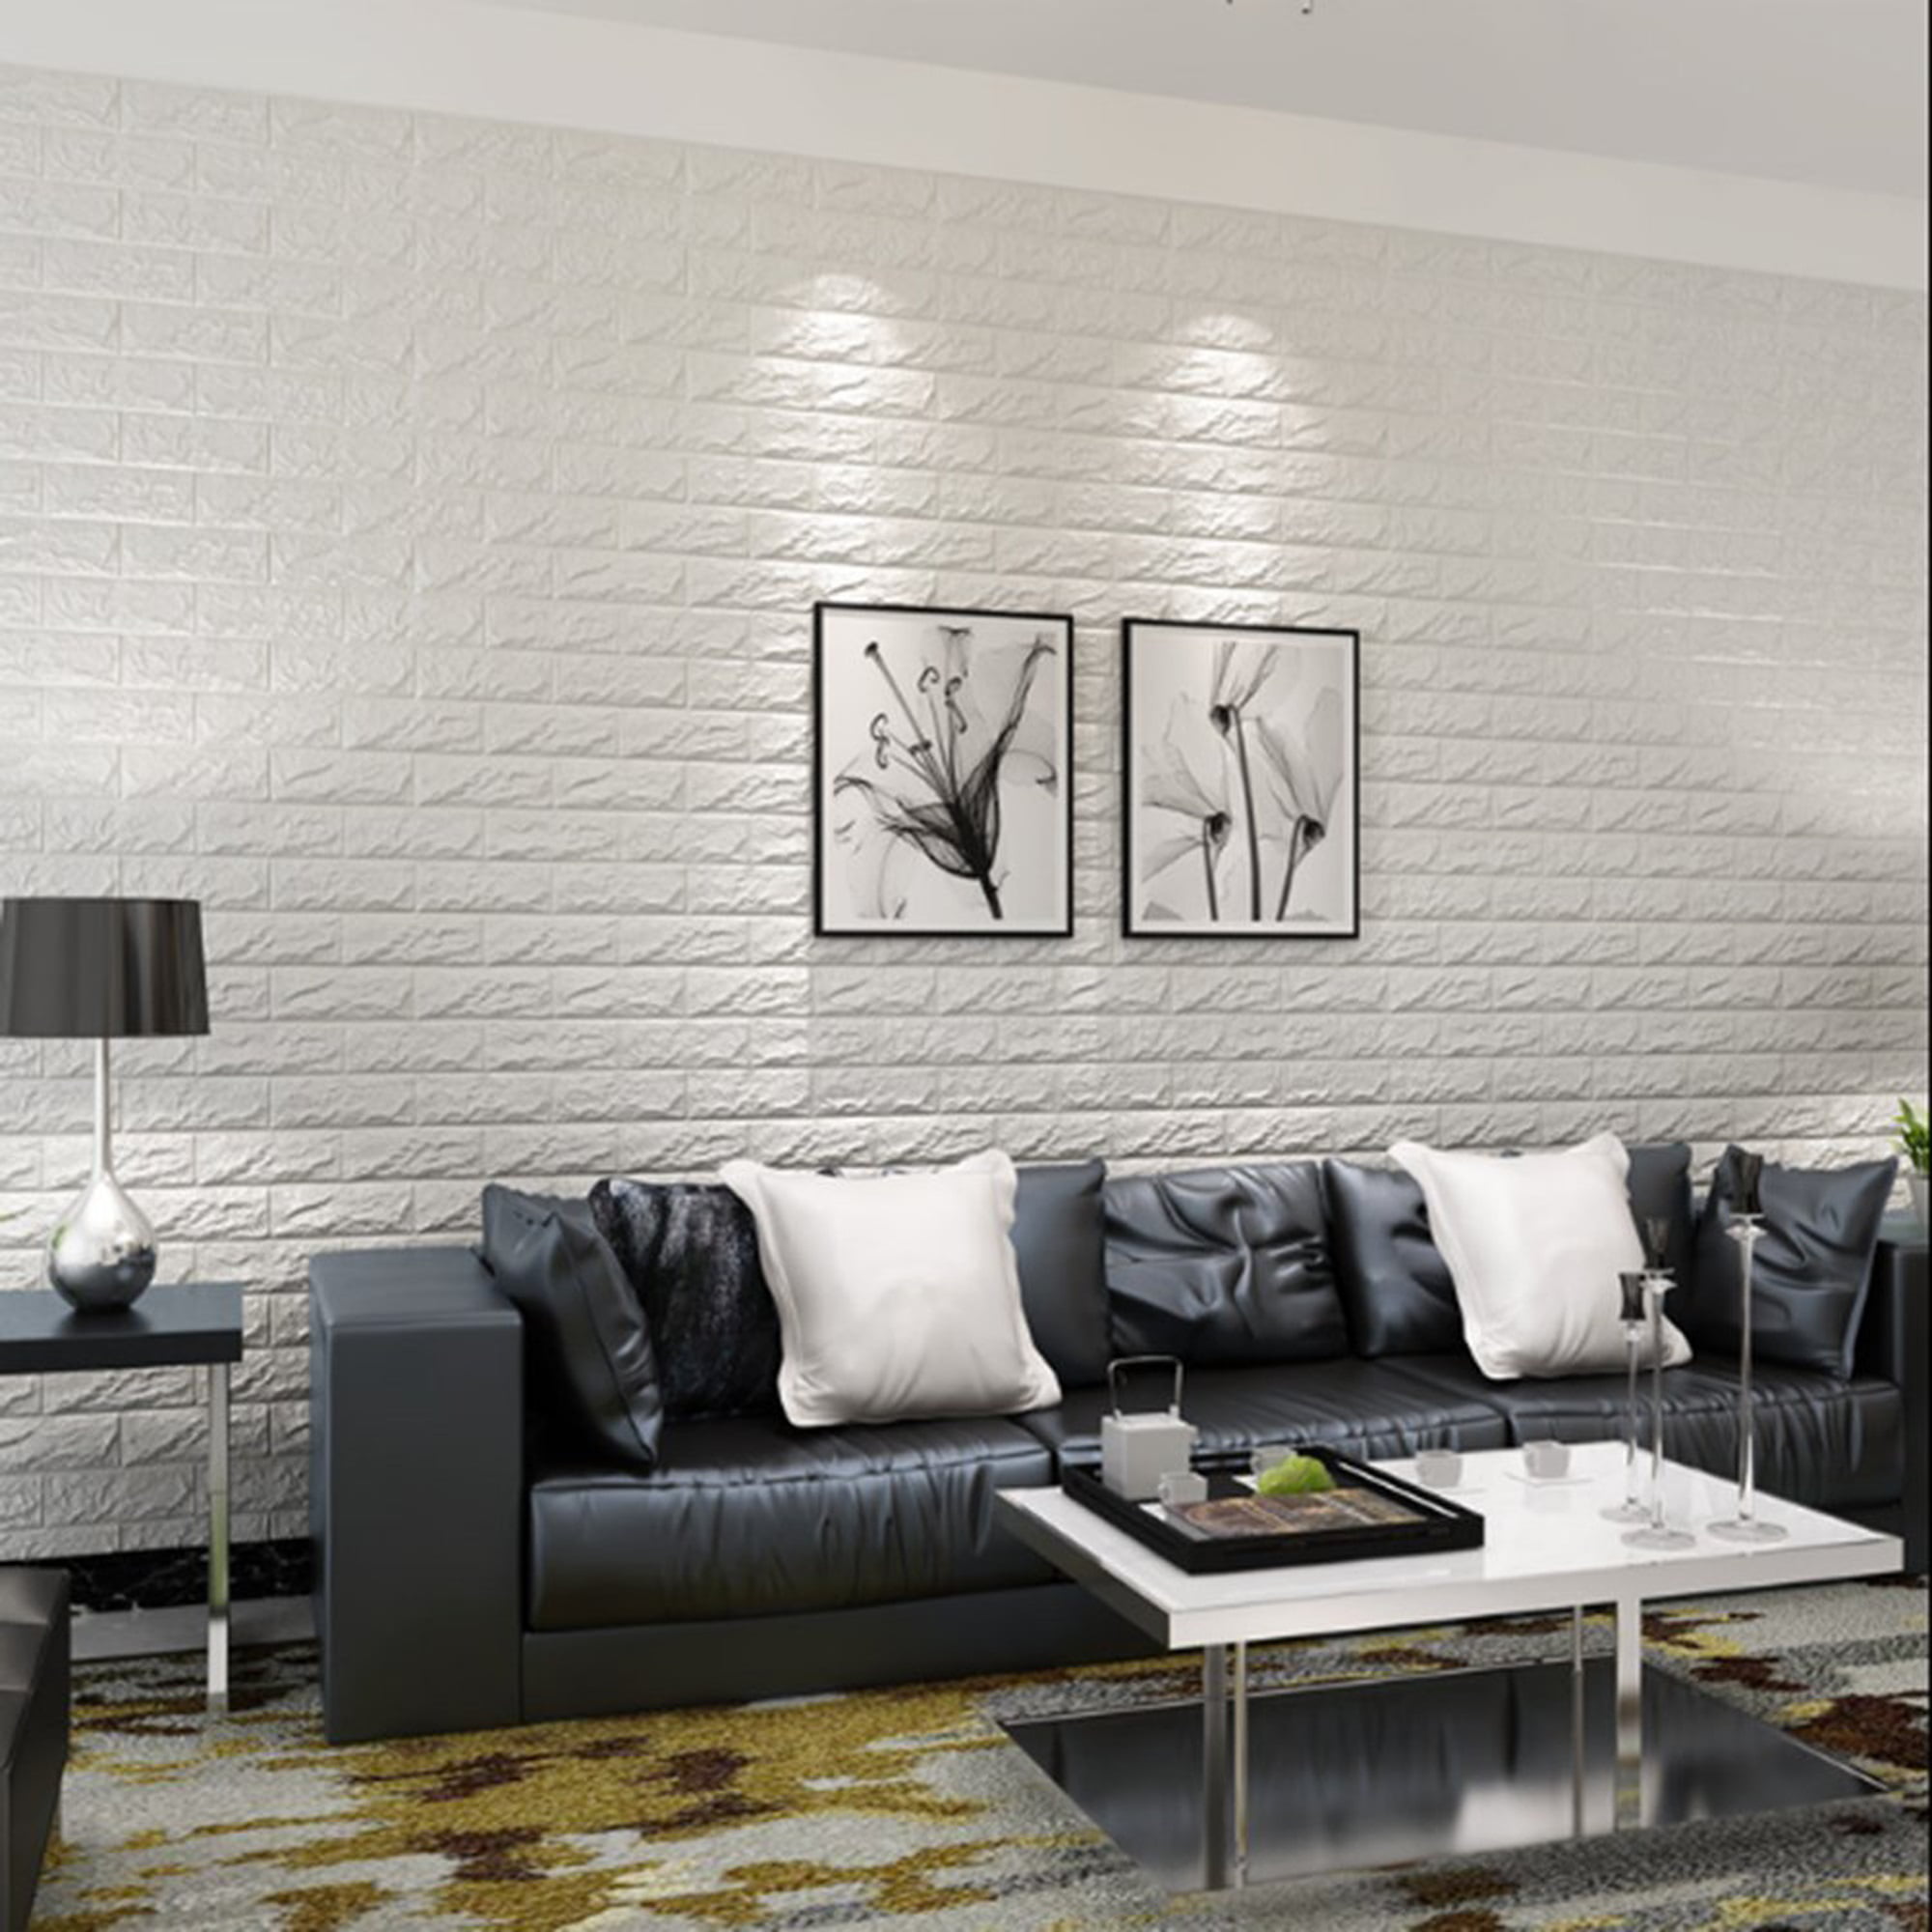 SAYFUT 10 Packs 4 Sq.Ft Peel and Stick 3D Wall Stickers Panels White Brick Wallpaper Bedroom